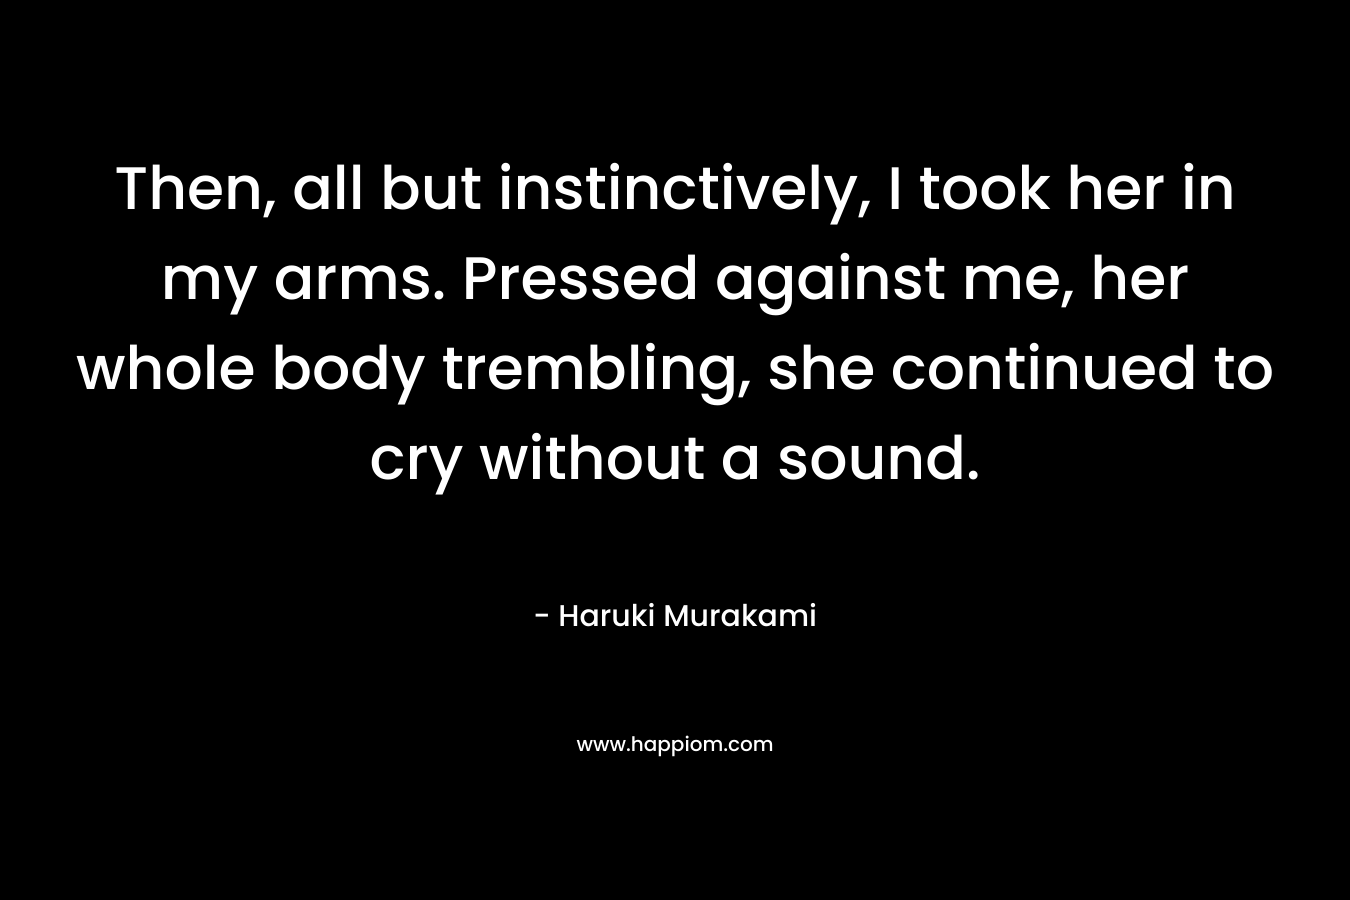 Then, all but instinctively, I took her in my arms. Pressed against me, her whole body trembling, she continued to cry without a sound. – Haruki Murakami